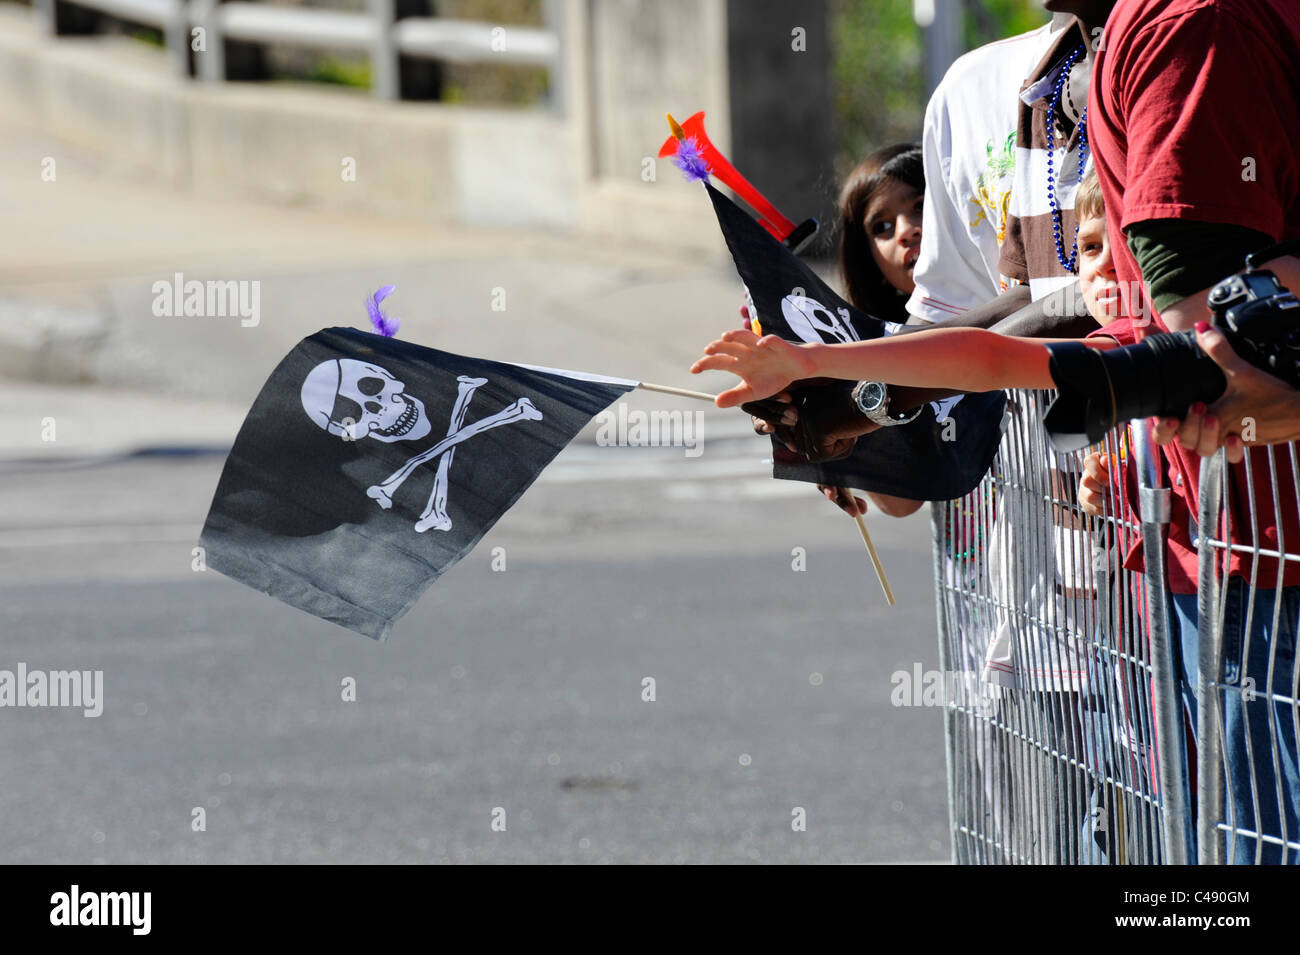 Crossbones and Skull flags waving during annual Tampa Florida Gasparilla Pirate Festival Parade Stock Photo